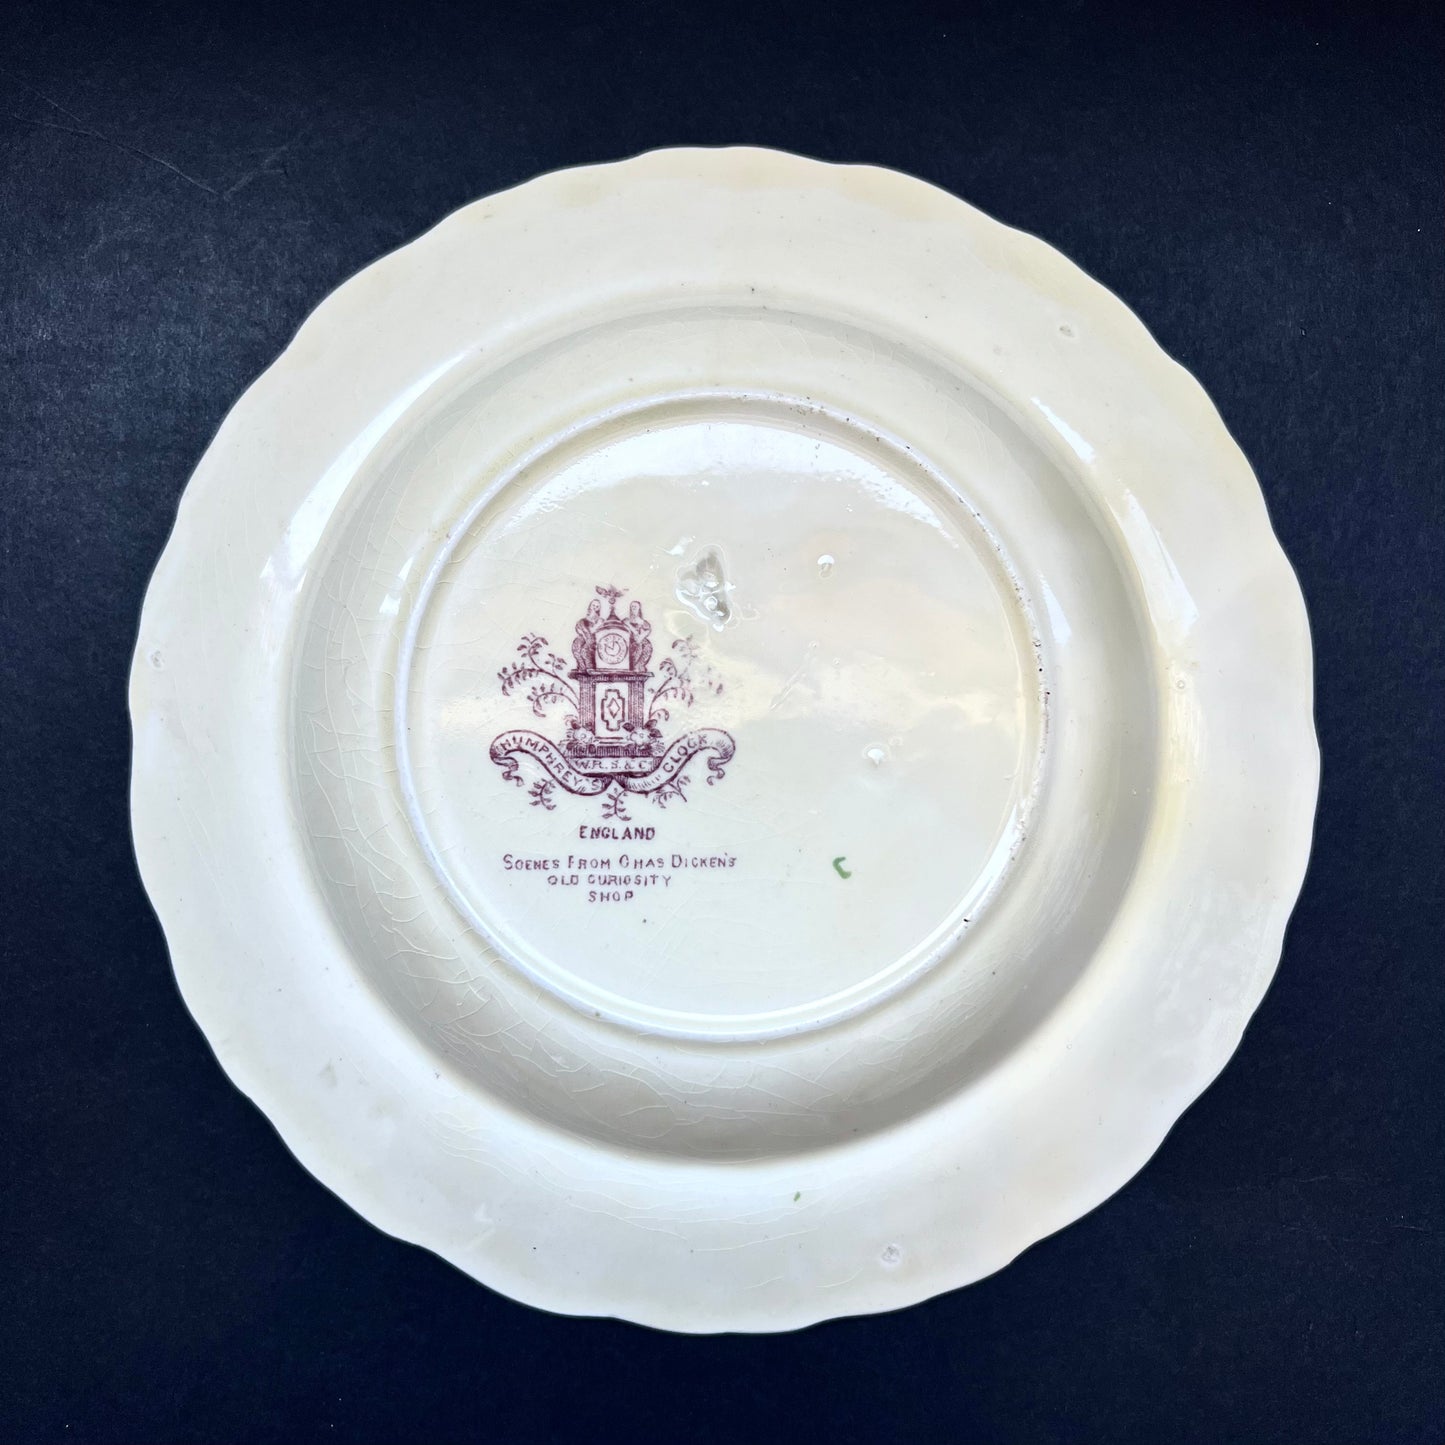 Late 19th century W&R Co. Roses purple polychrome transfer plate manufactured by Ridgway, featuring Charles Dickens Old Curiosity Shop